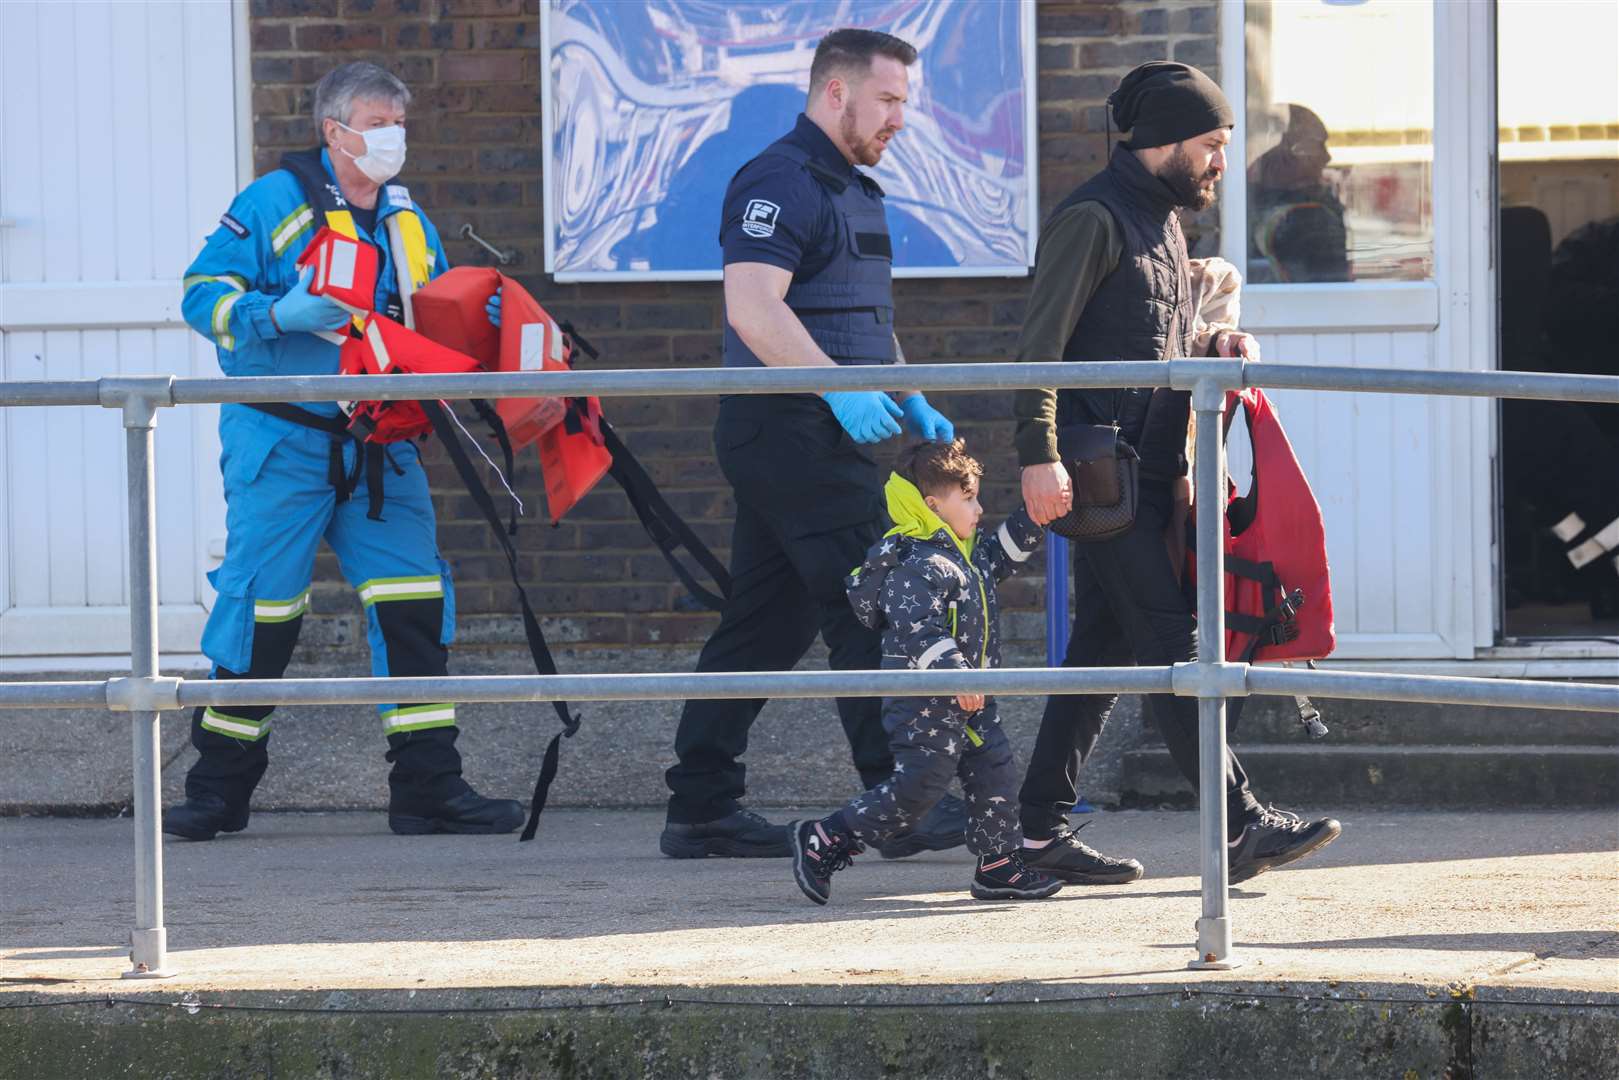 Another child holds the hand of an adult and is escorted to safety by an official Picture: UKNIP